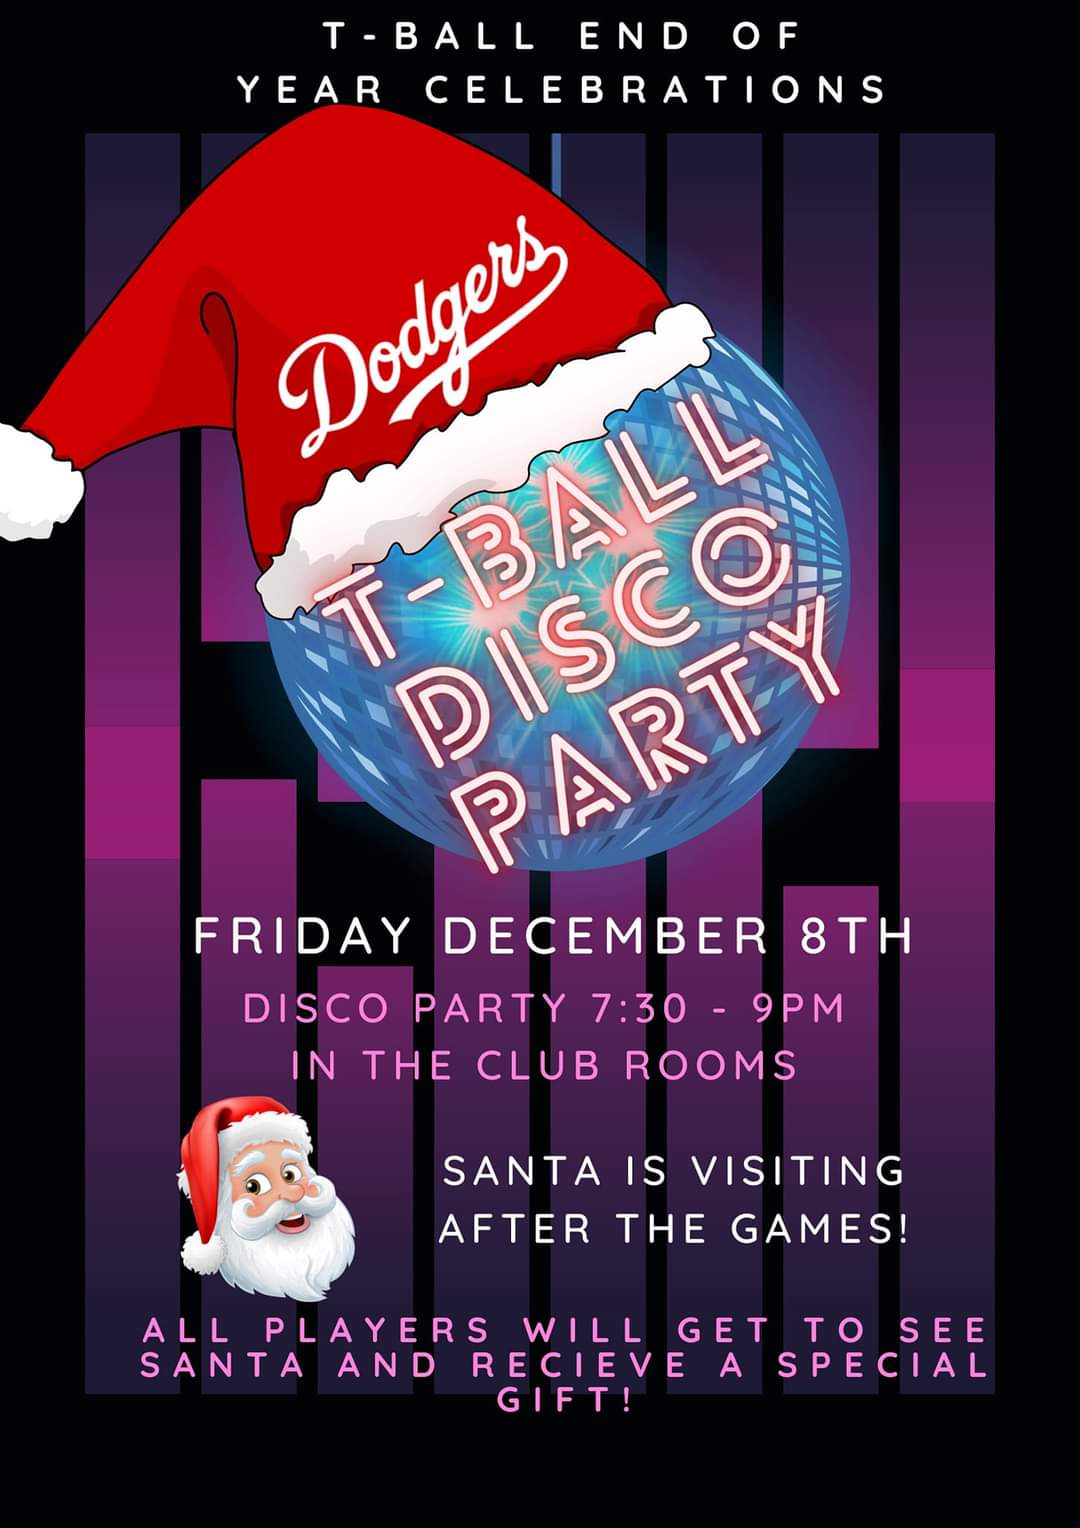 Dodgers T-Ball Disco Party Night Poster 2023